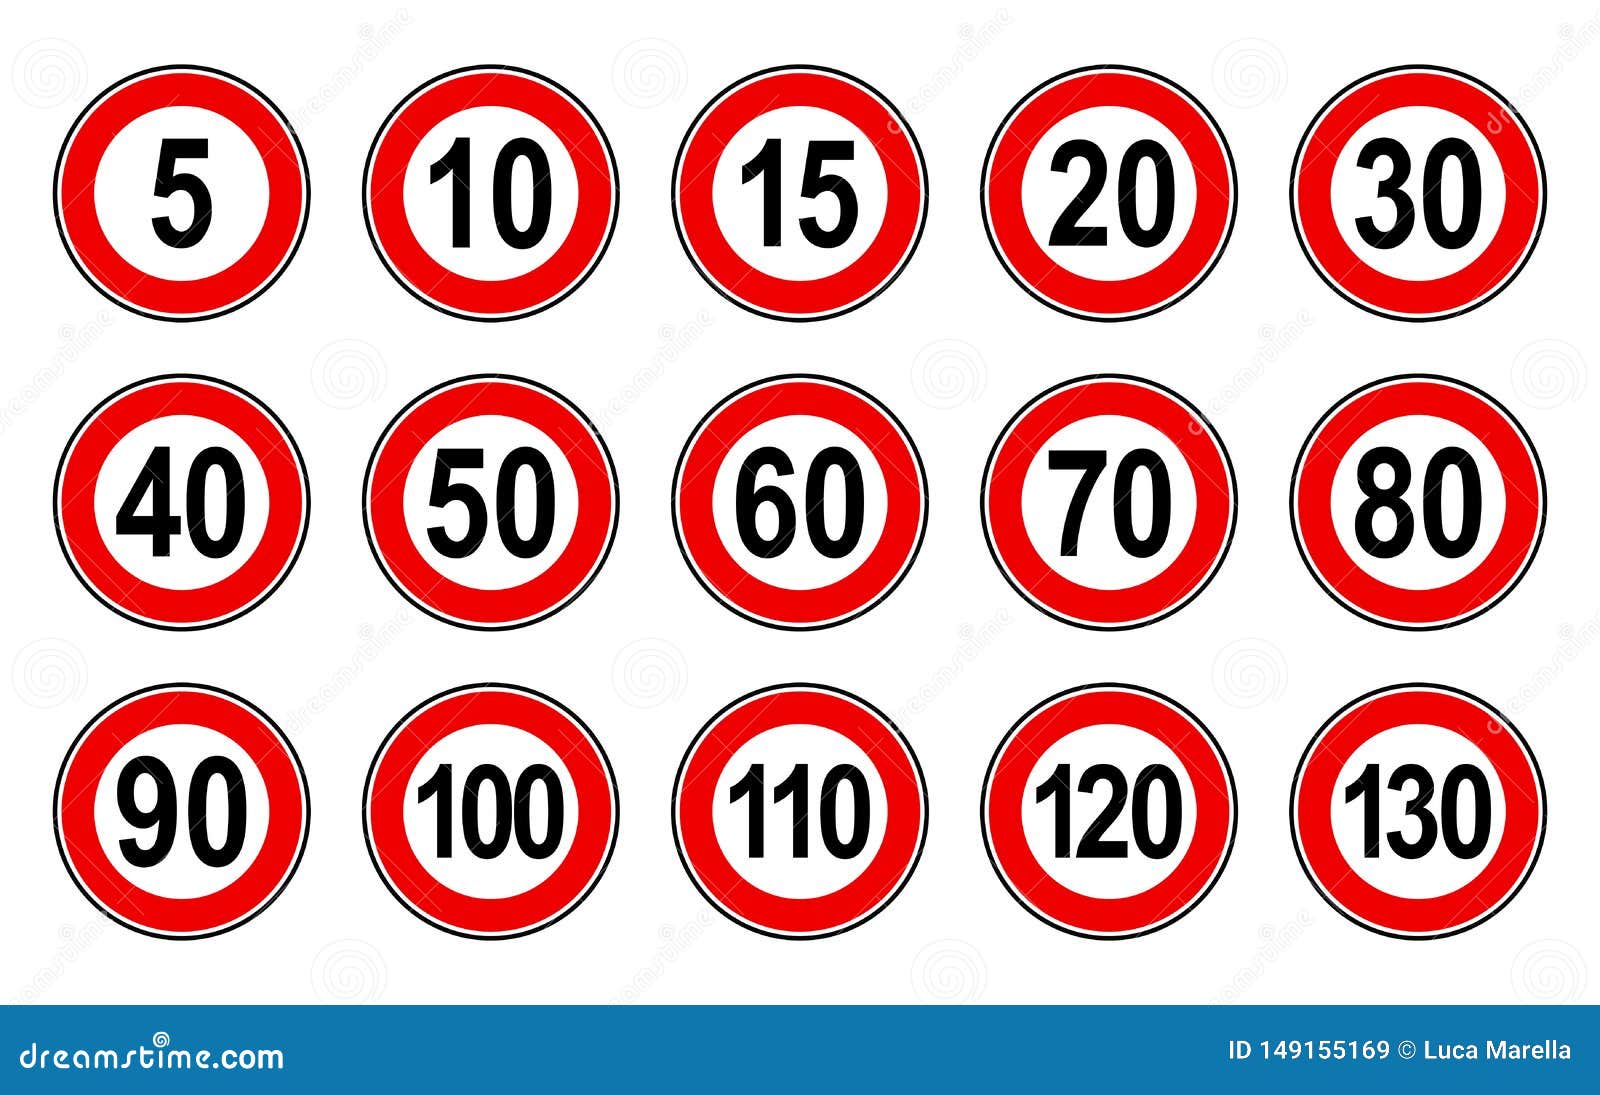  flat style set of generic speed limit signs with black number and red circle